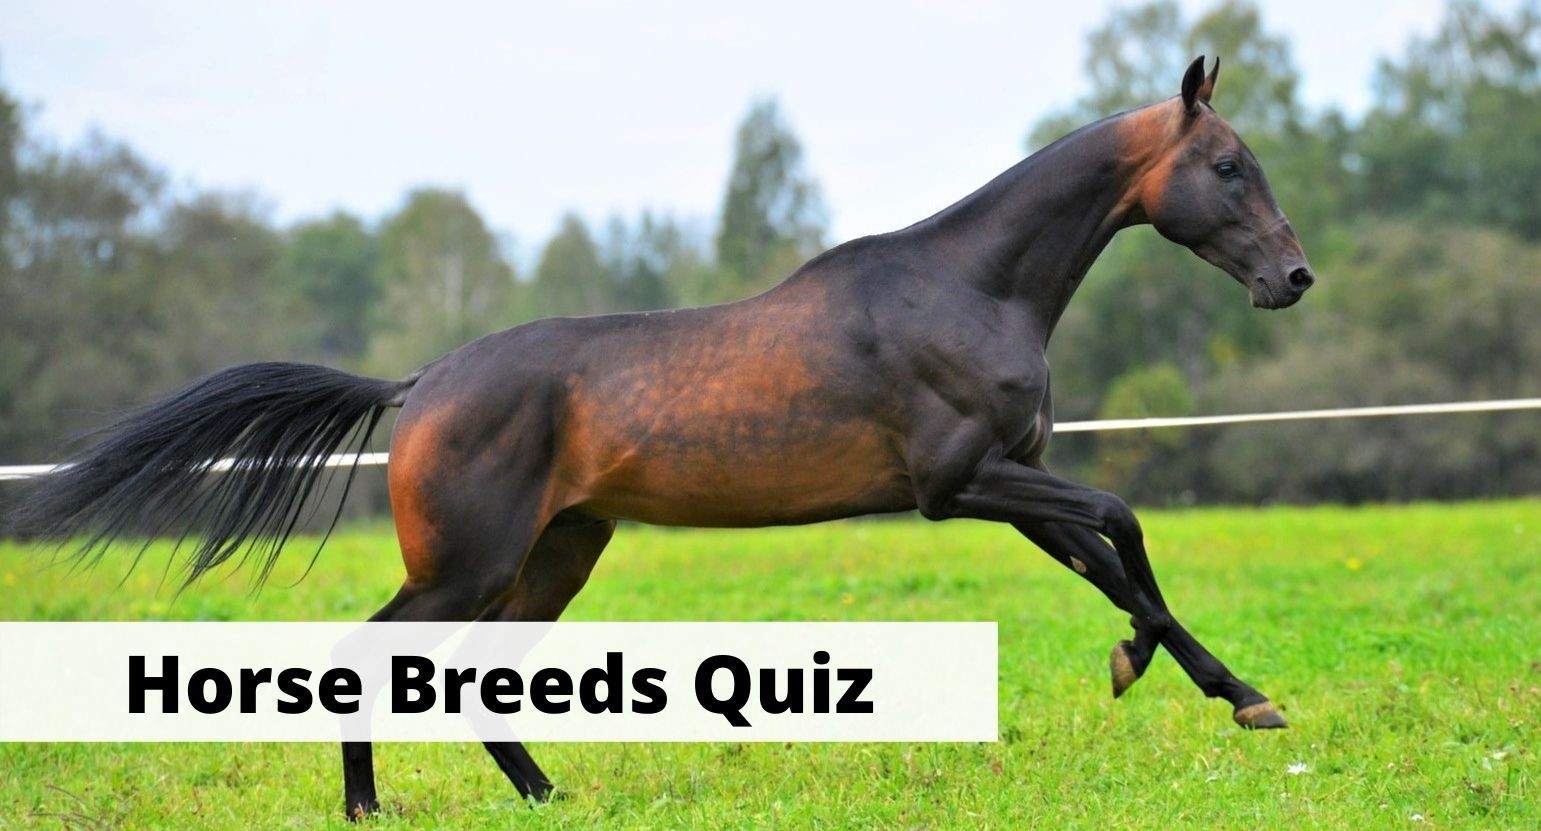 Horse Breeds Quiz: 20 Trivia Questions With Answers